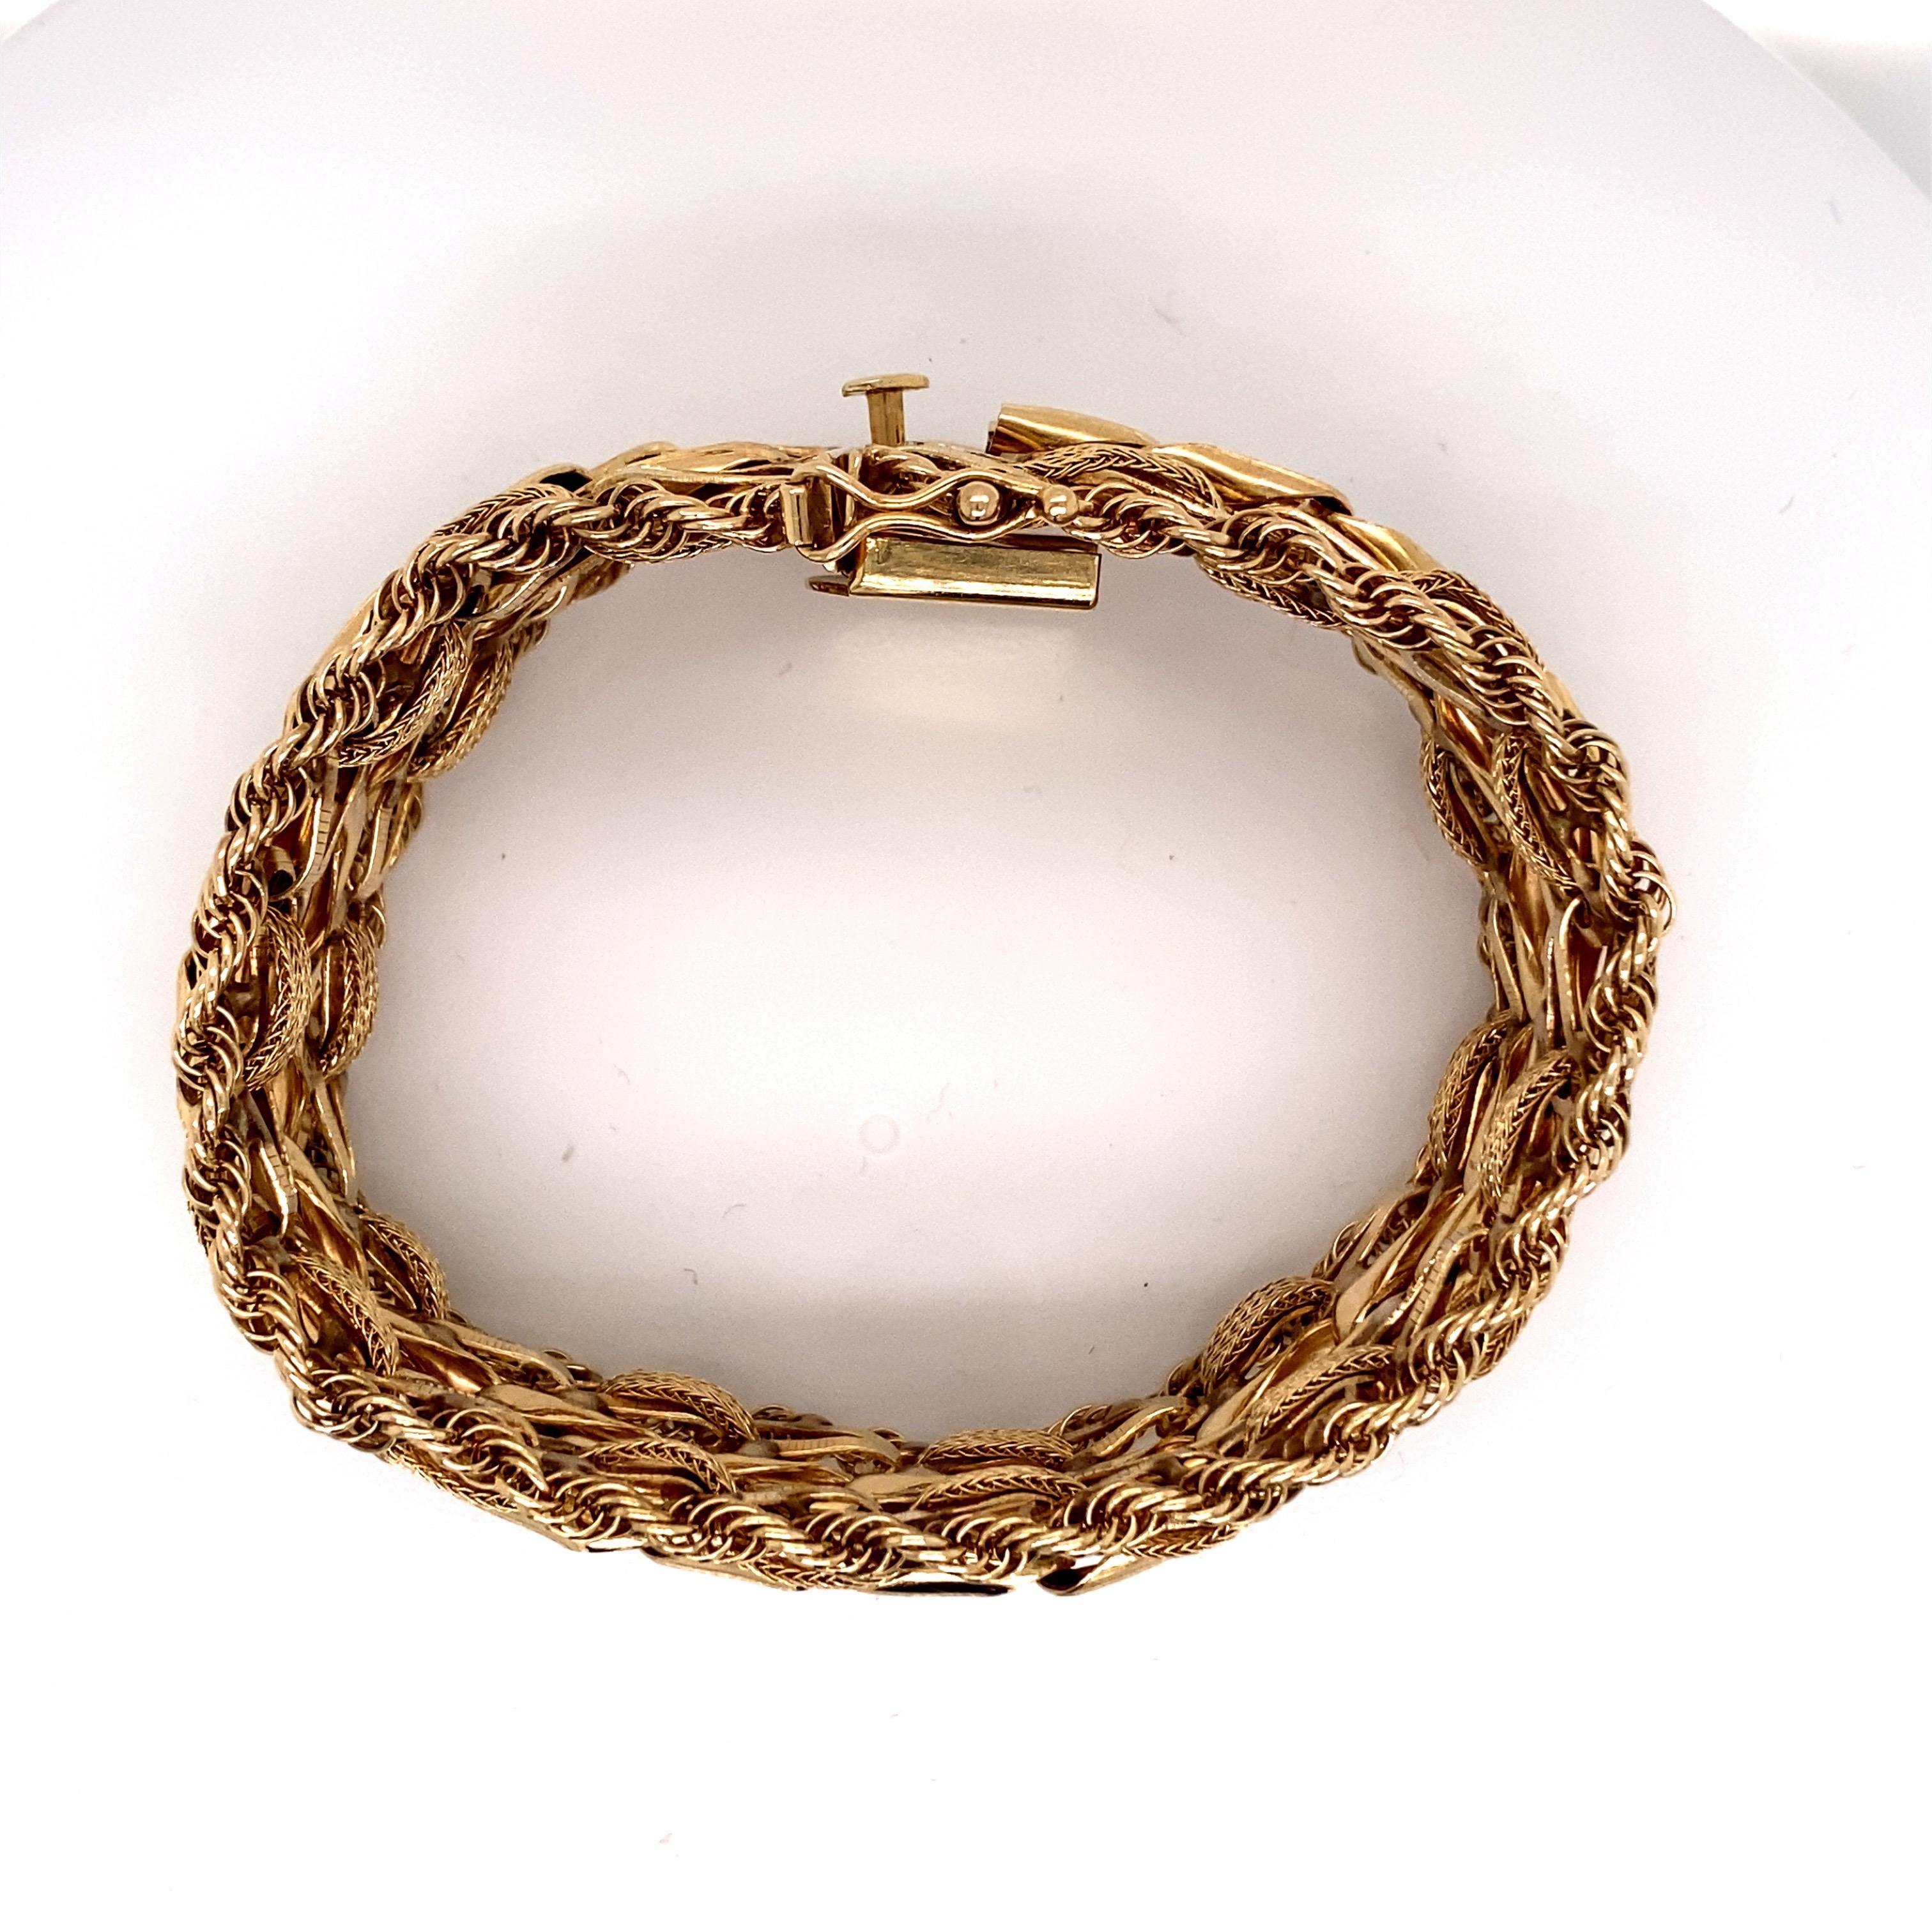 Vintage 1960s 14KY Gold Woven Wheat Link with Rope Edge Wide Charm Bracelet - The bracelet measure 7.15 inches long and 1 inch wide and features a hidden clasp with a figure 8 safety. There are 2 jump rings to attach a safety chain for added